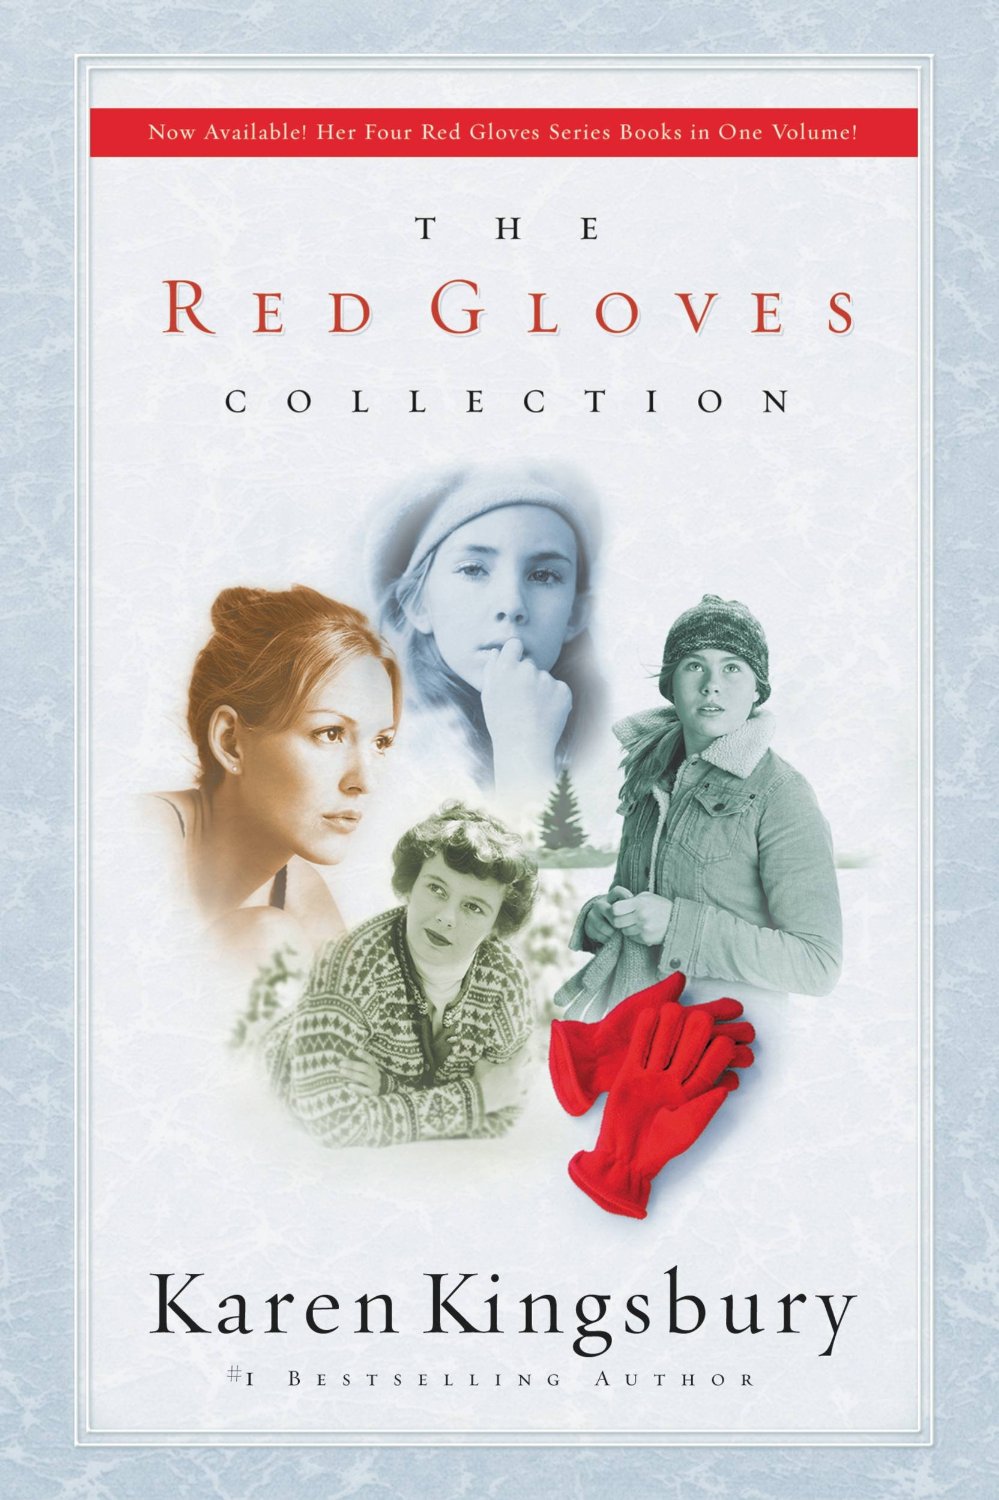 Red Gloves Series Collection